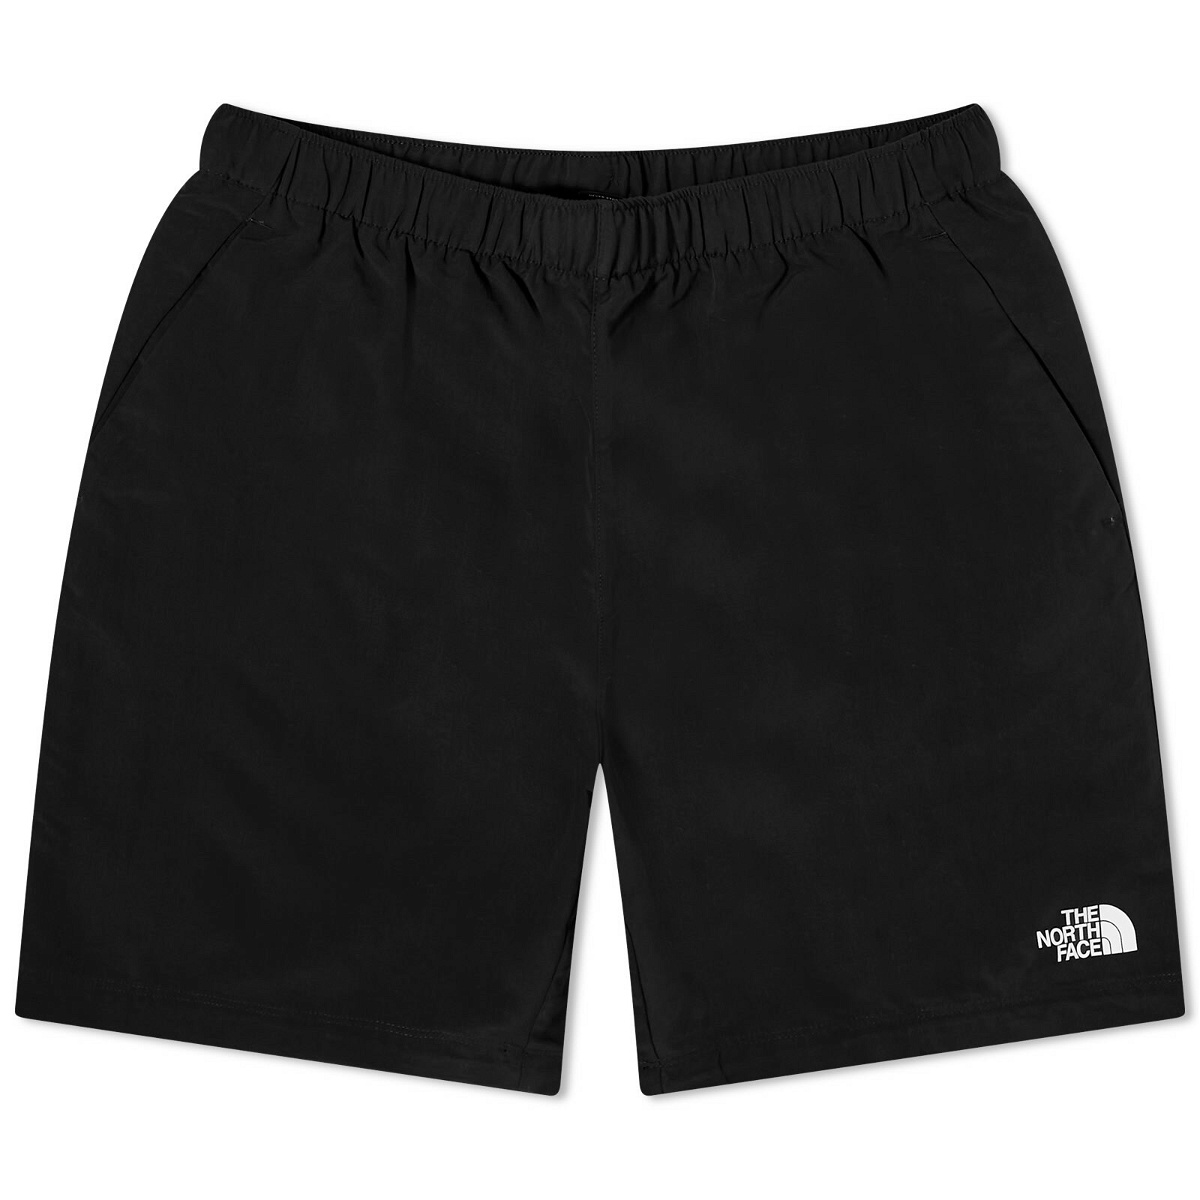 Photo: The North Face Men's Water Shorts in Tnf Black